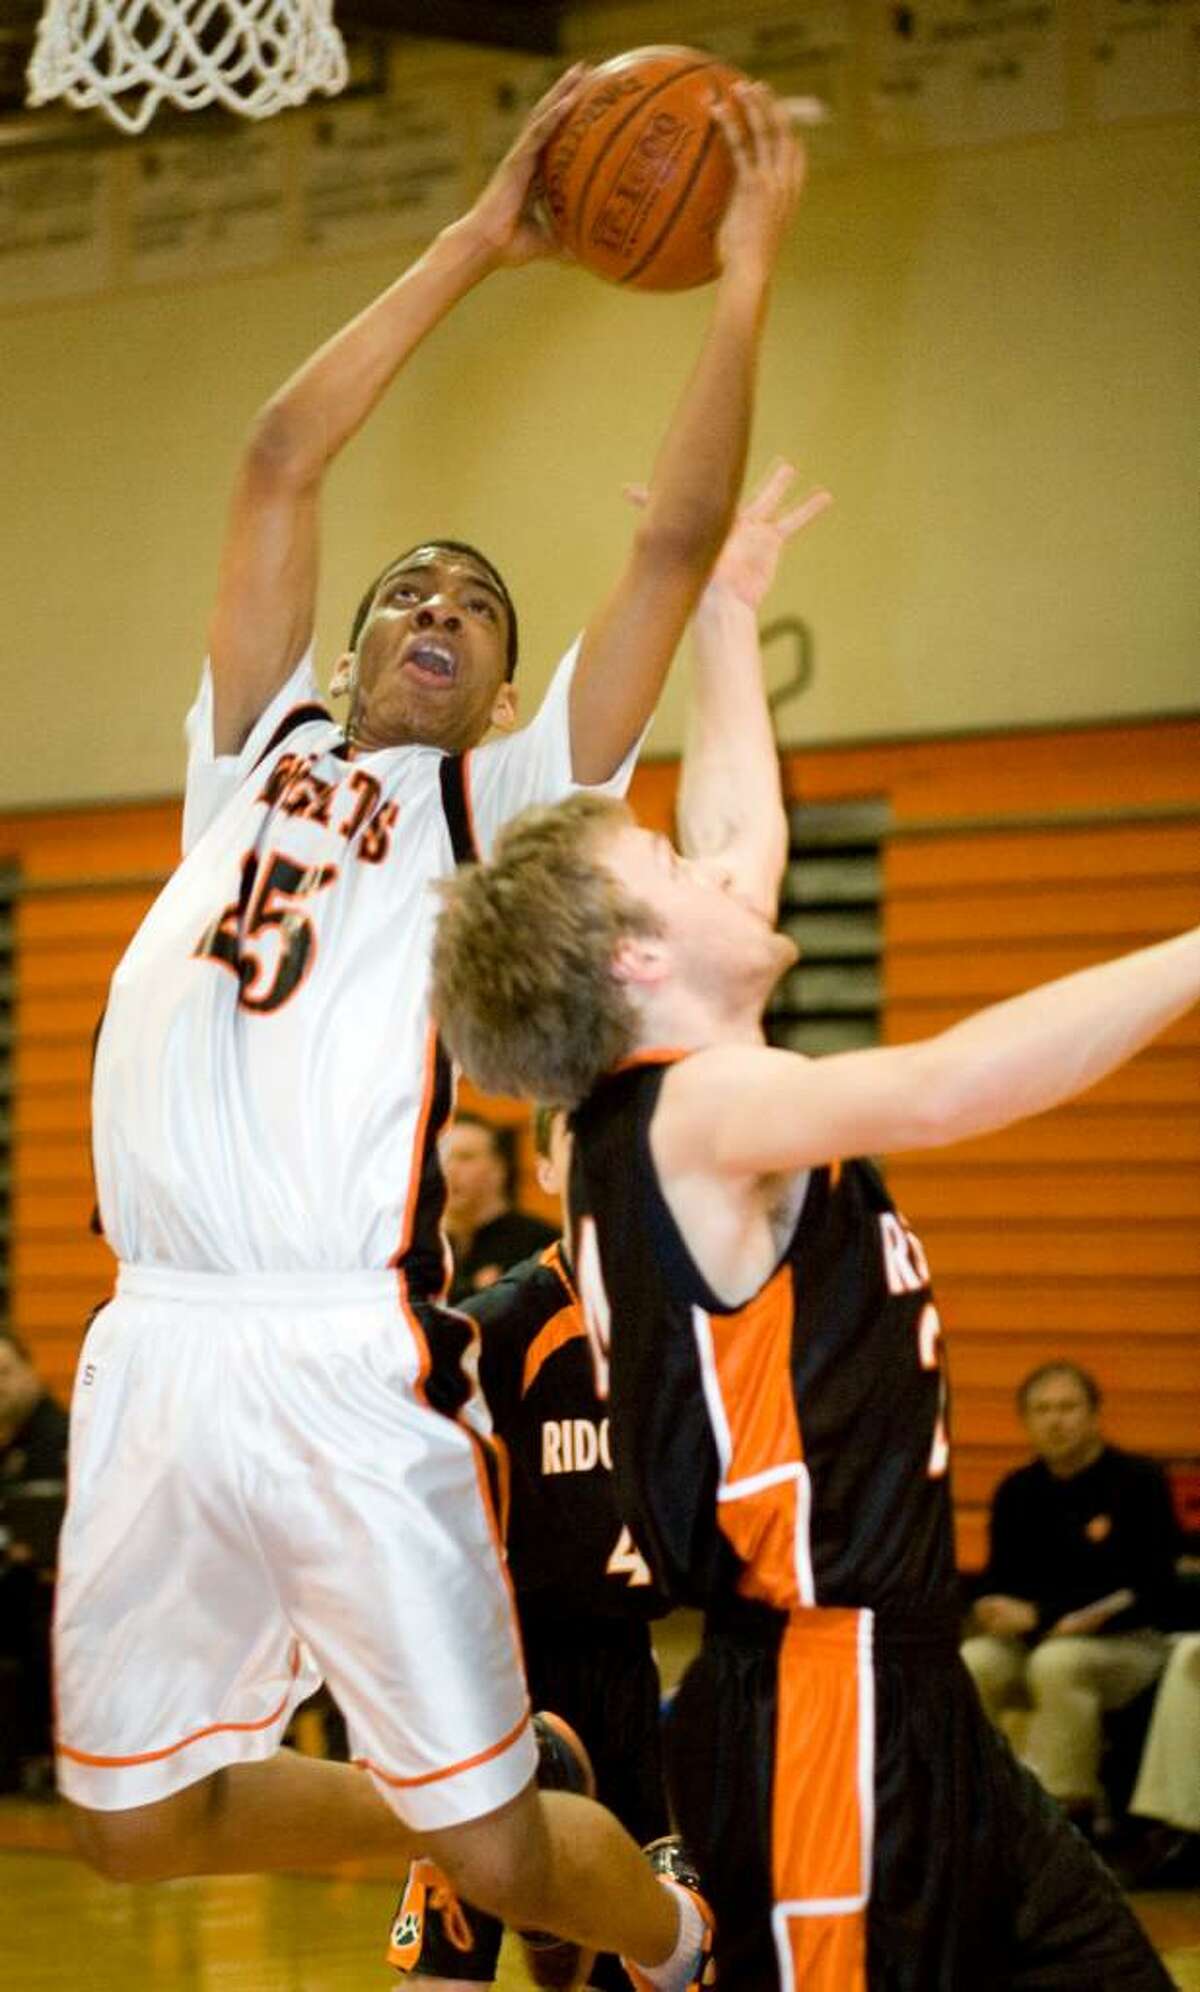 Stamford High School's #25 Terrance Dimitri, left, takes a shot on basket as he's defended by Ridgefield High School's #24 Ryan Curnal during a boys basketball game in Stamford on Feb. 5, 2010.